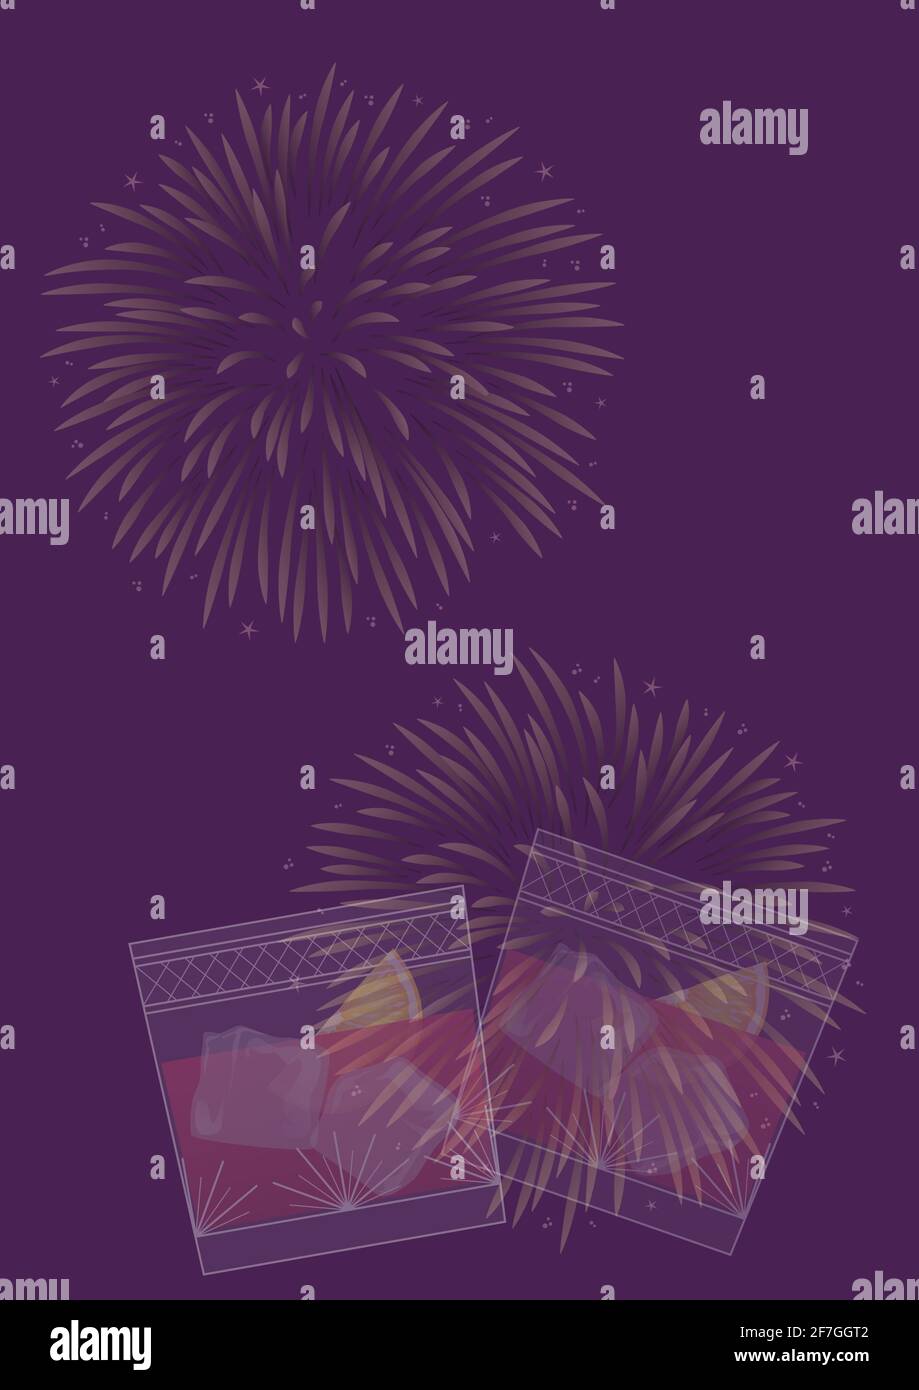 Composition of two drinks making toast with fireworks on purple background Stock Photo